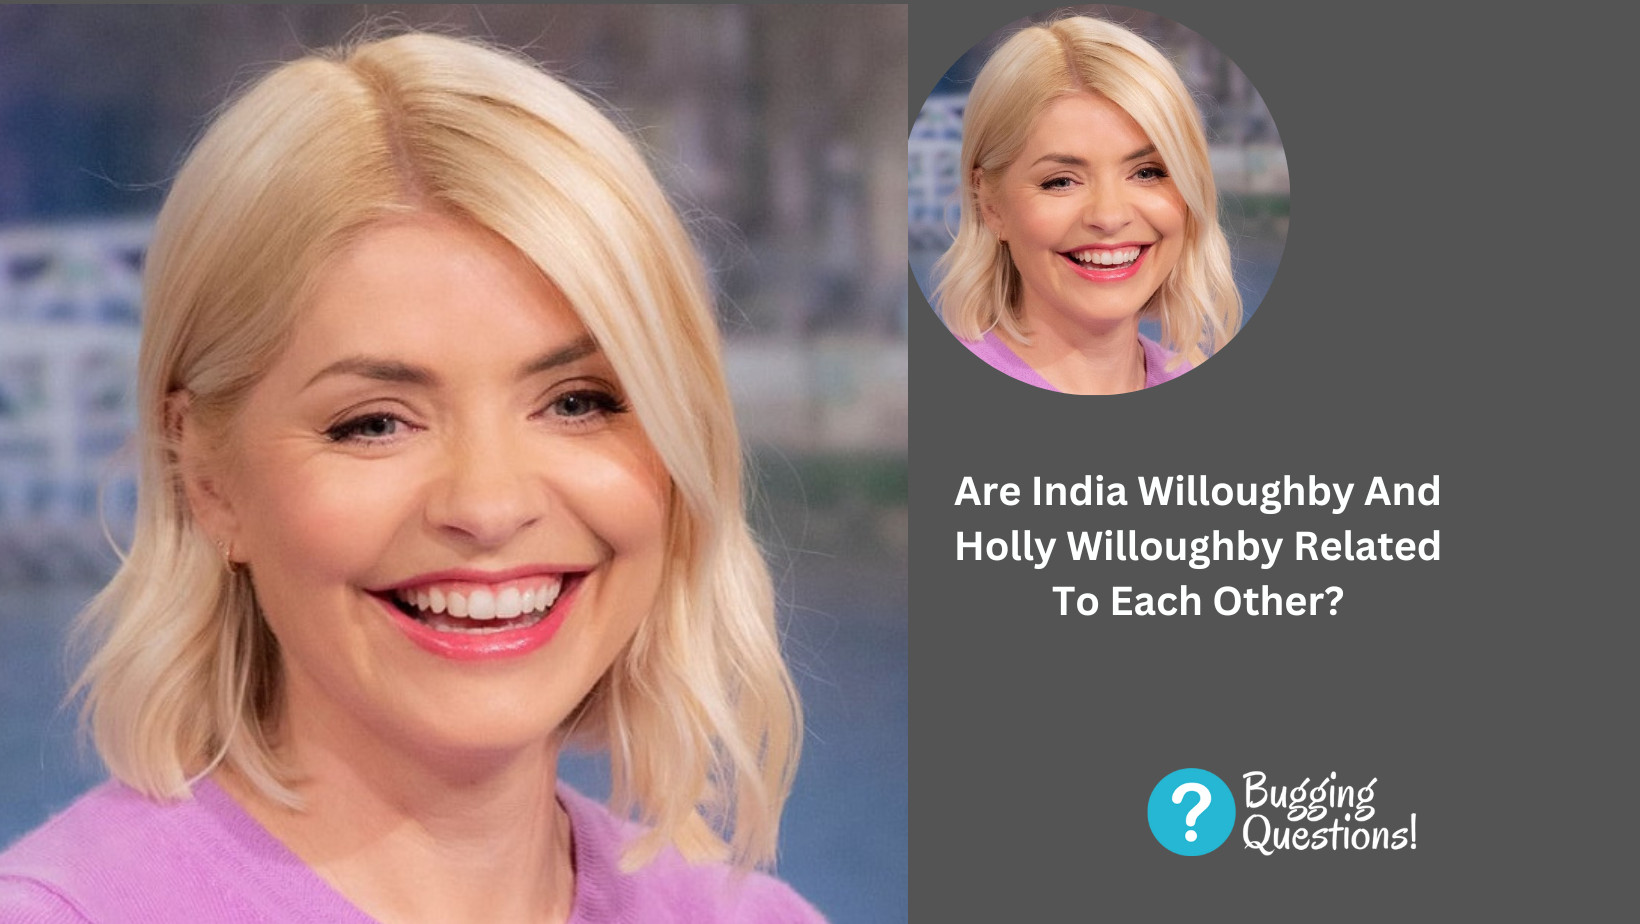 Are India Willoughby And Holly Willoughby Related To Each Other?